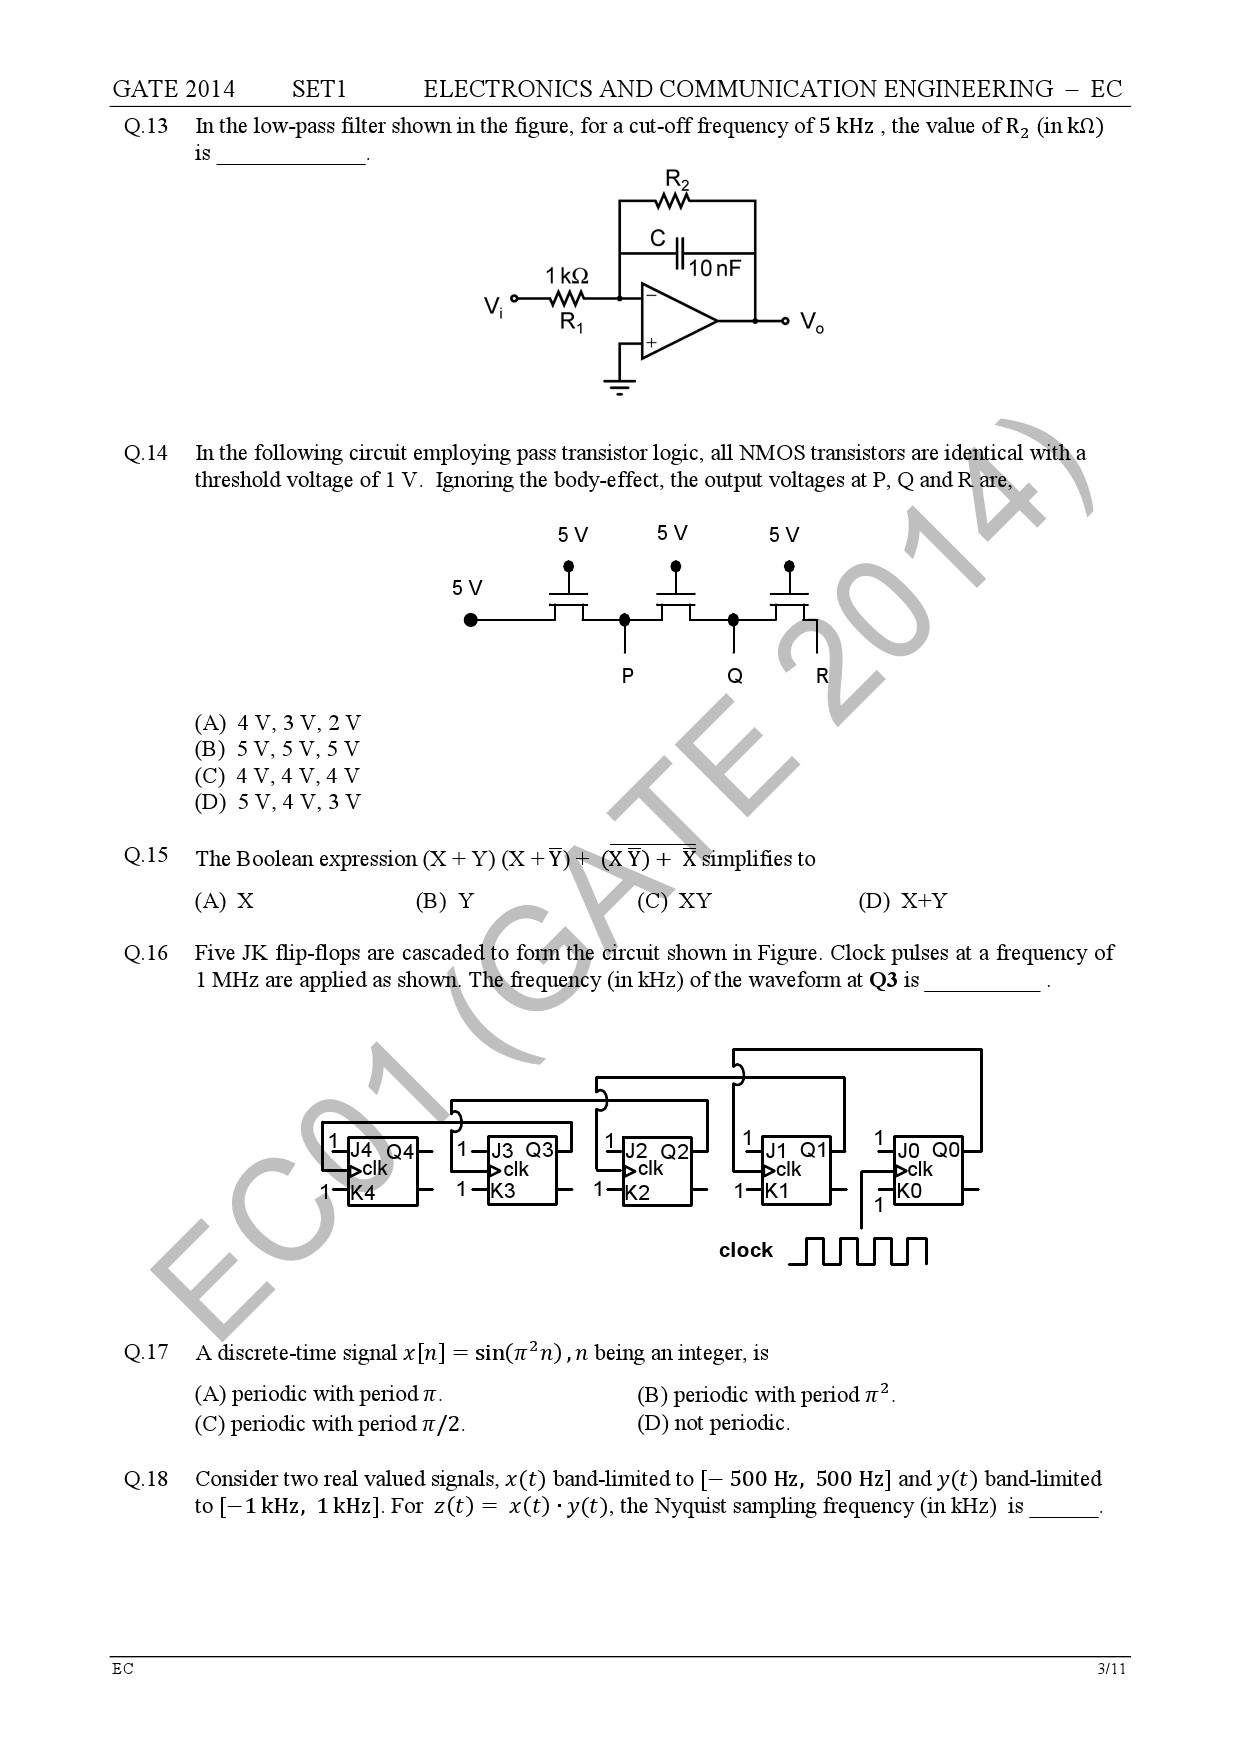 GATE Exam Question Paper 2014 Electronics and Communication Engineering Set 1 9